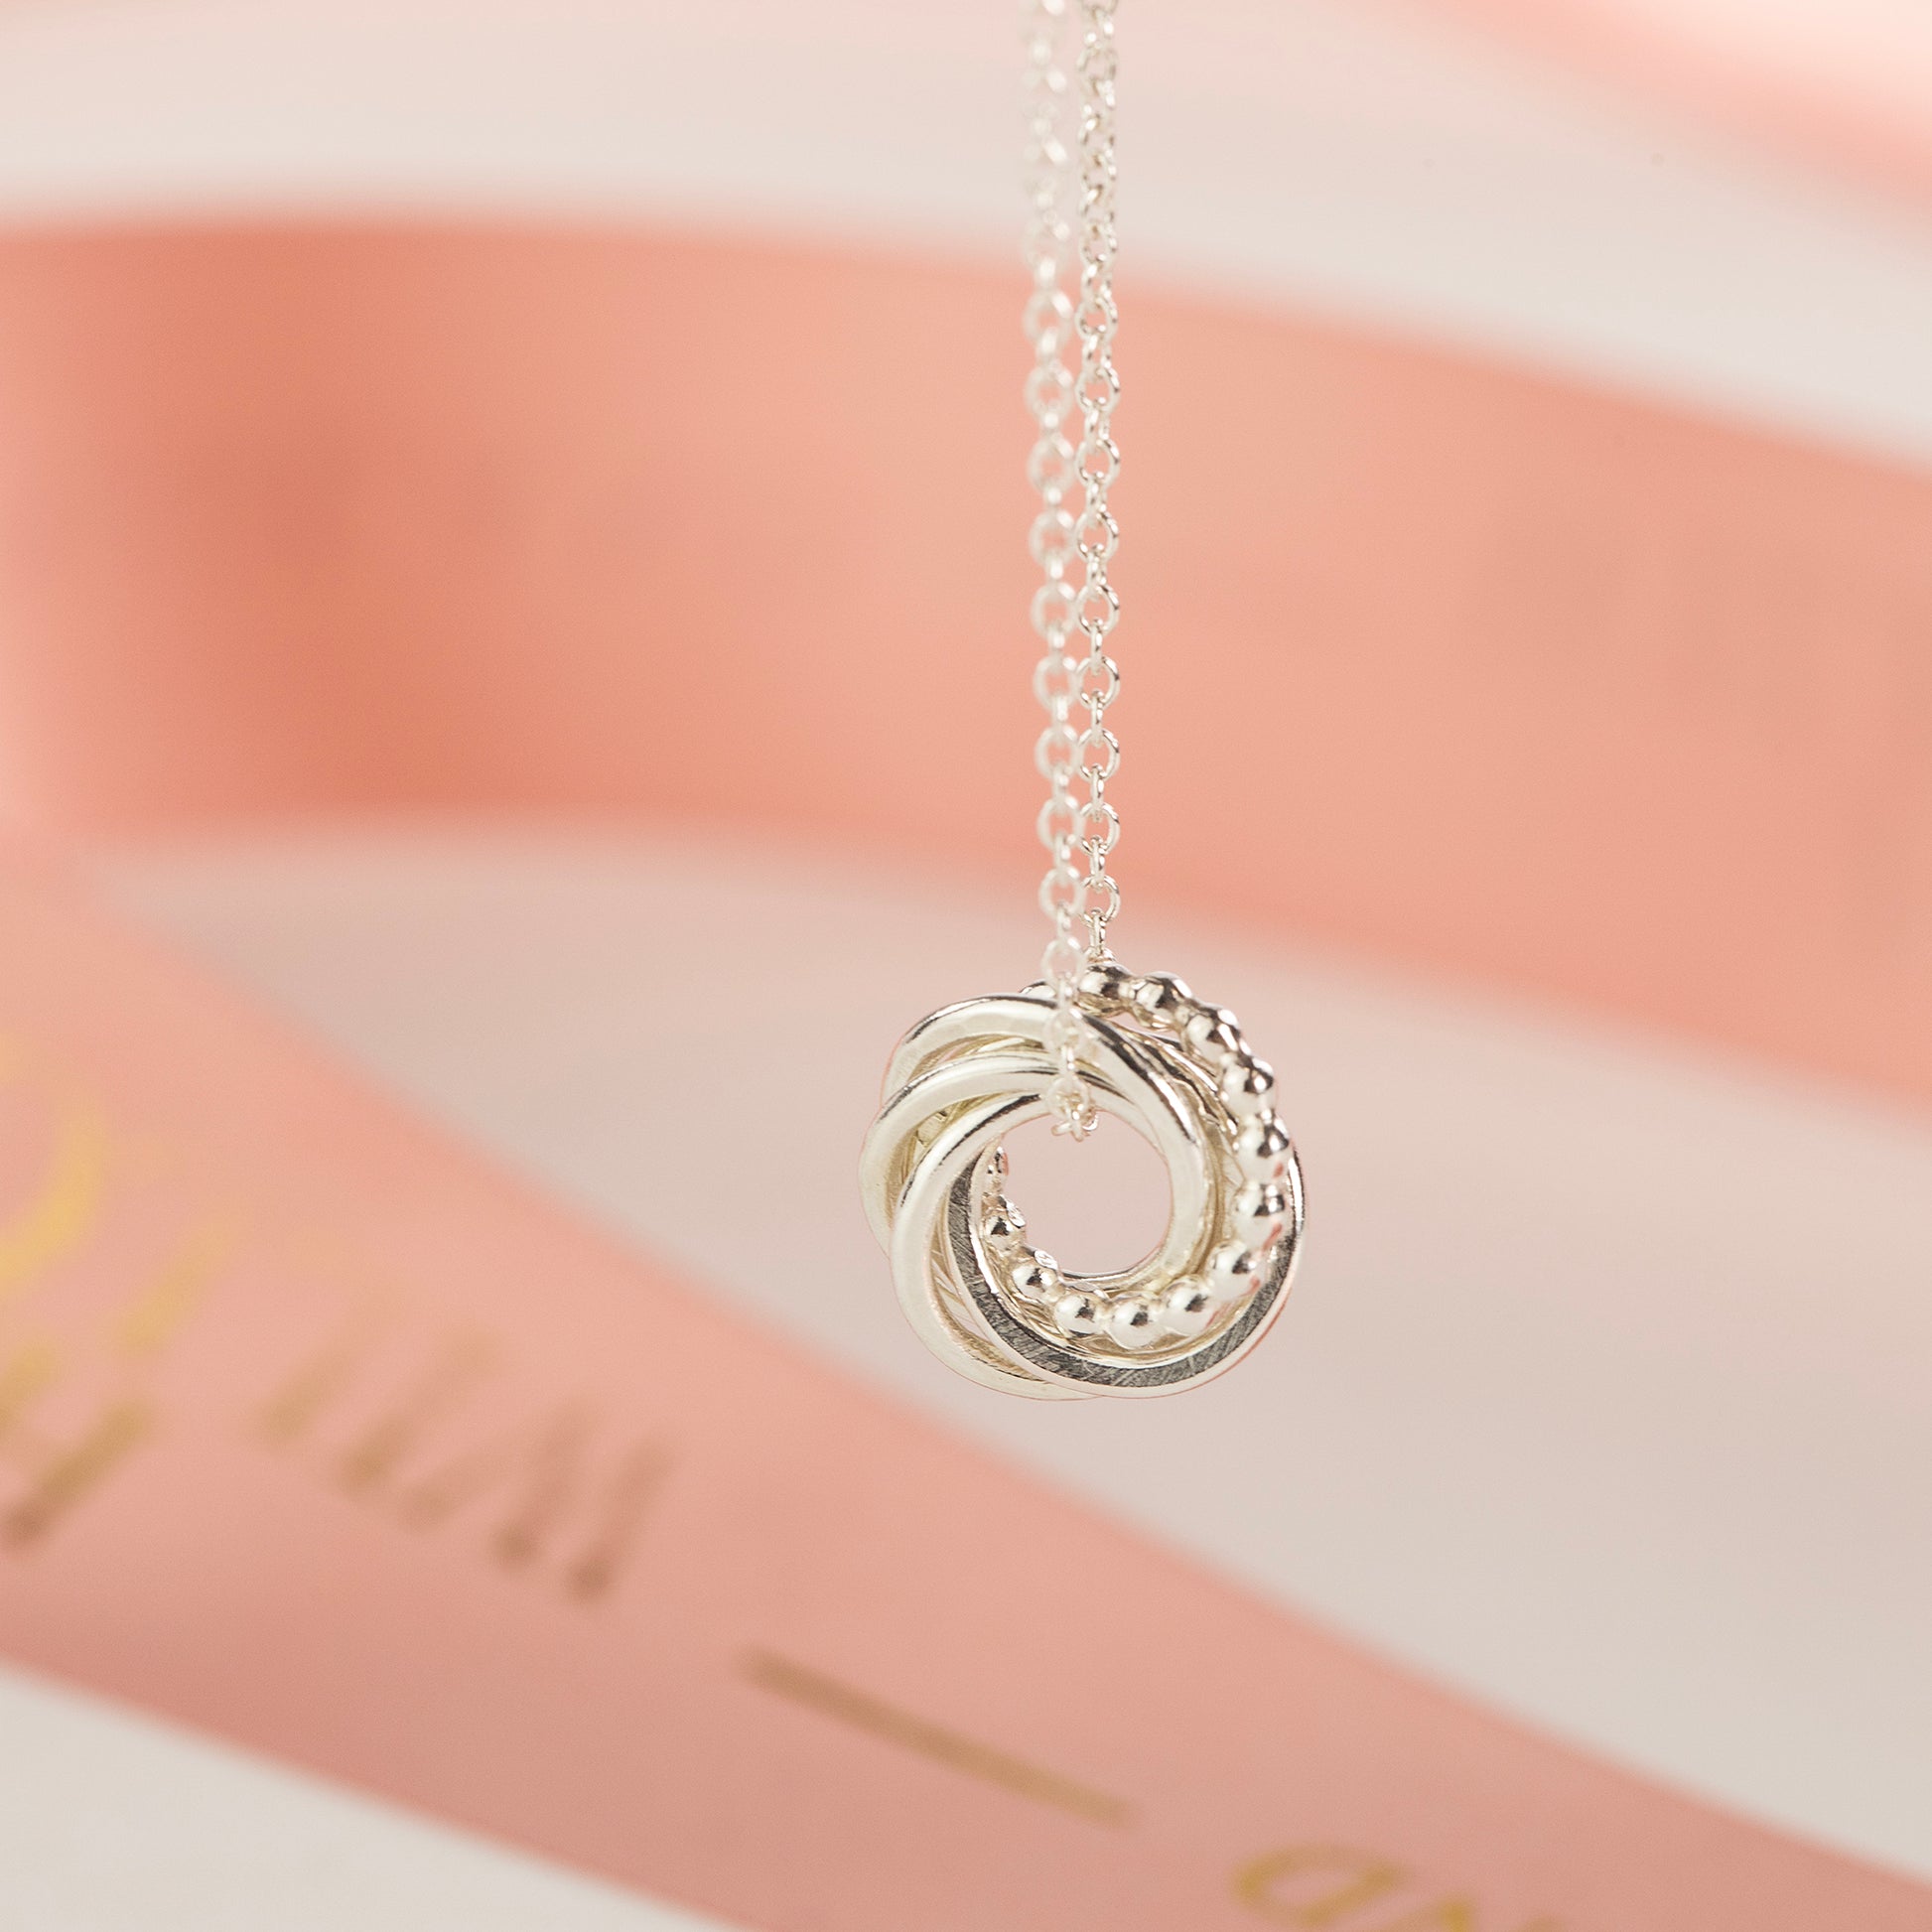 6th anniversary necklace